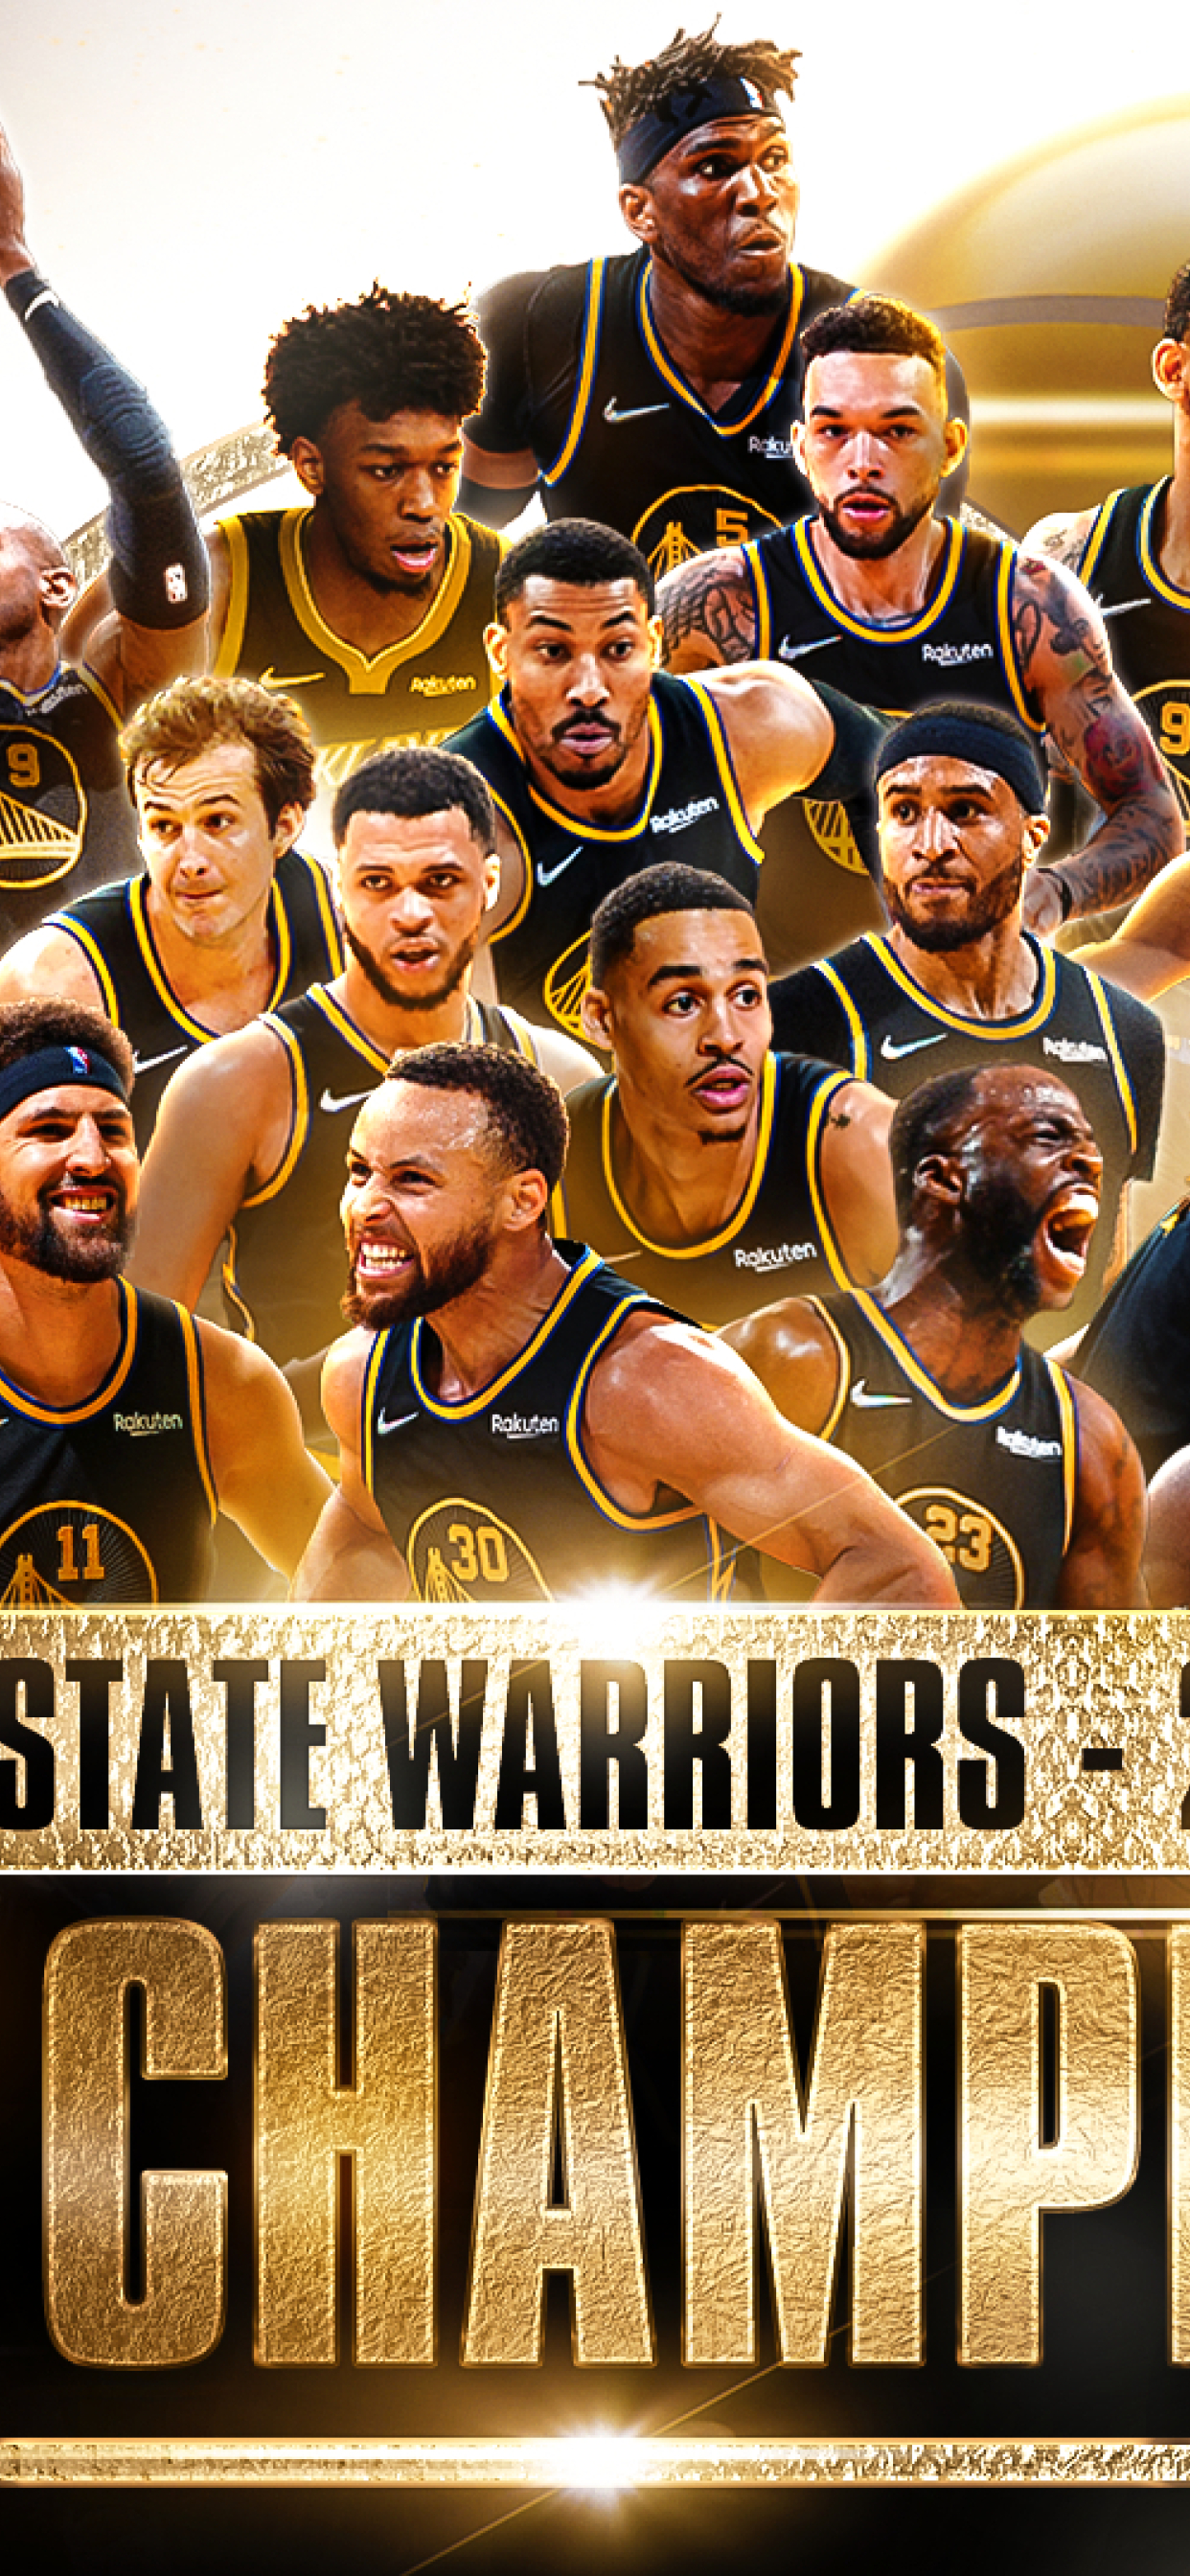 HoopsWallpaperscom  Get the latest HD and mobile NBA wallpapers today Golden  State Warriors Archives  HoopsWallpaperscom  Get the latest HD and  mobile NBA wallpapers today